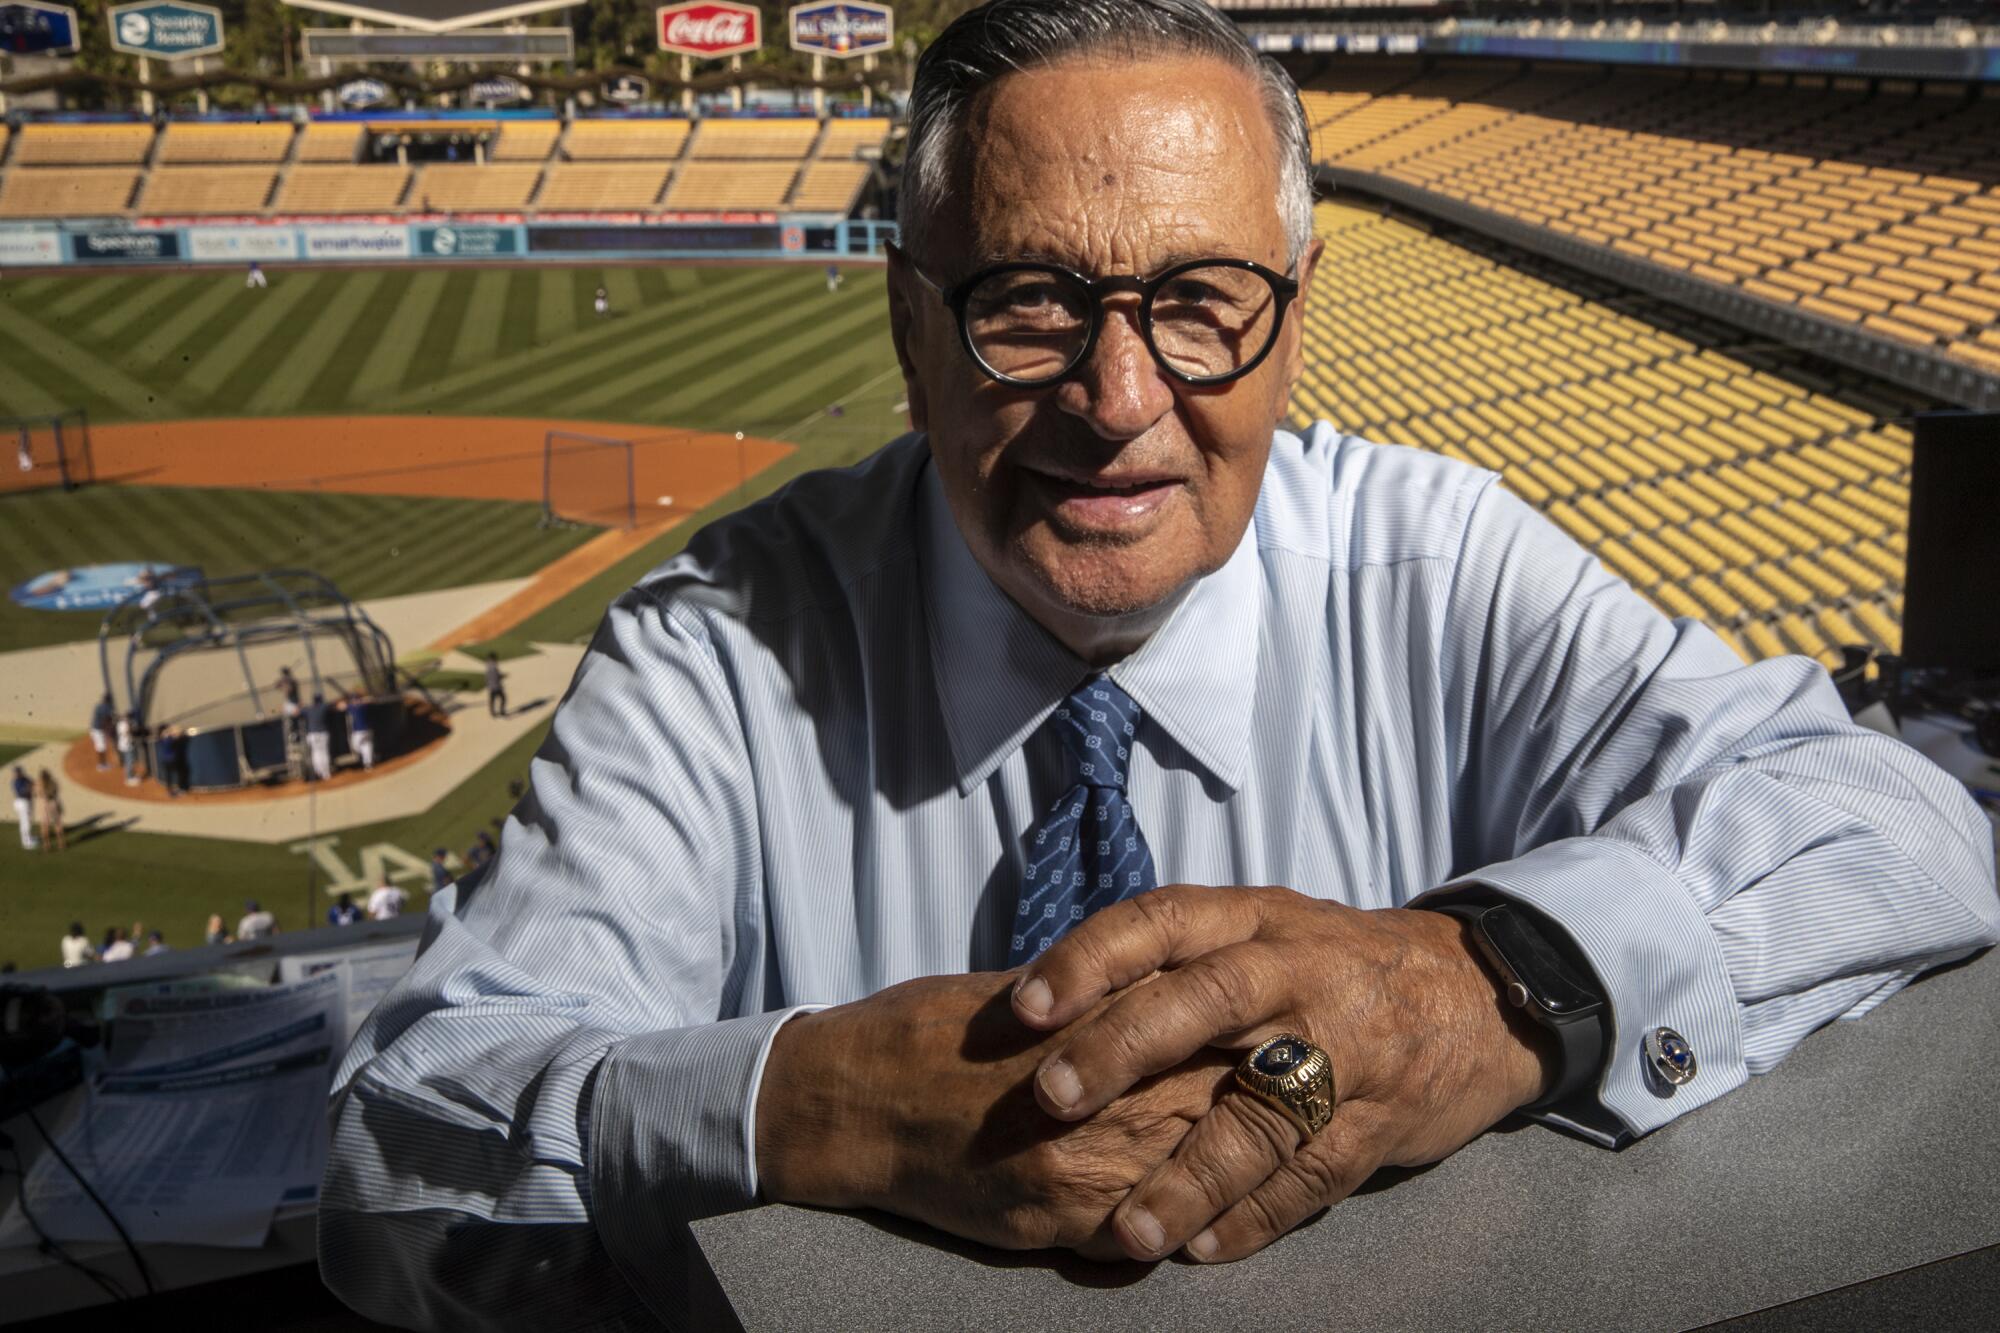 Veteran Dodgers broadcaster Jaime Jarrin sits in the Dodger Stadium booth with the field behind him.